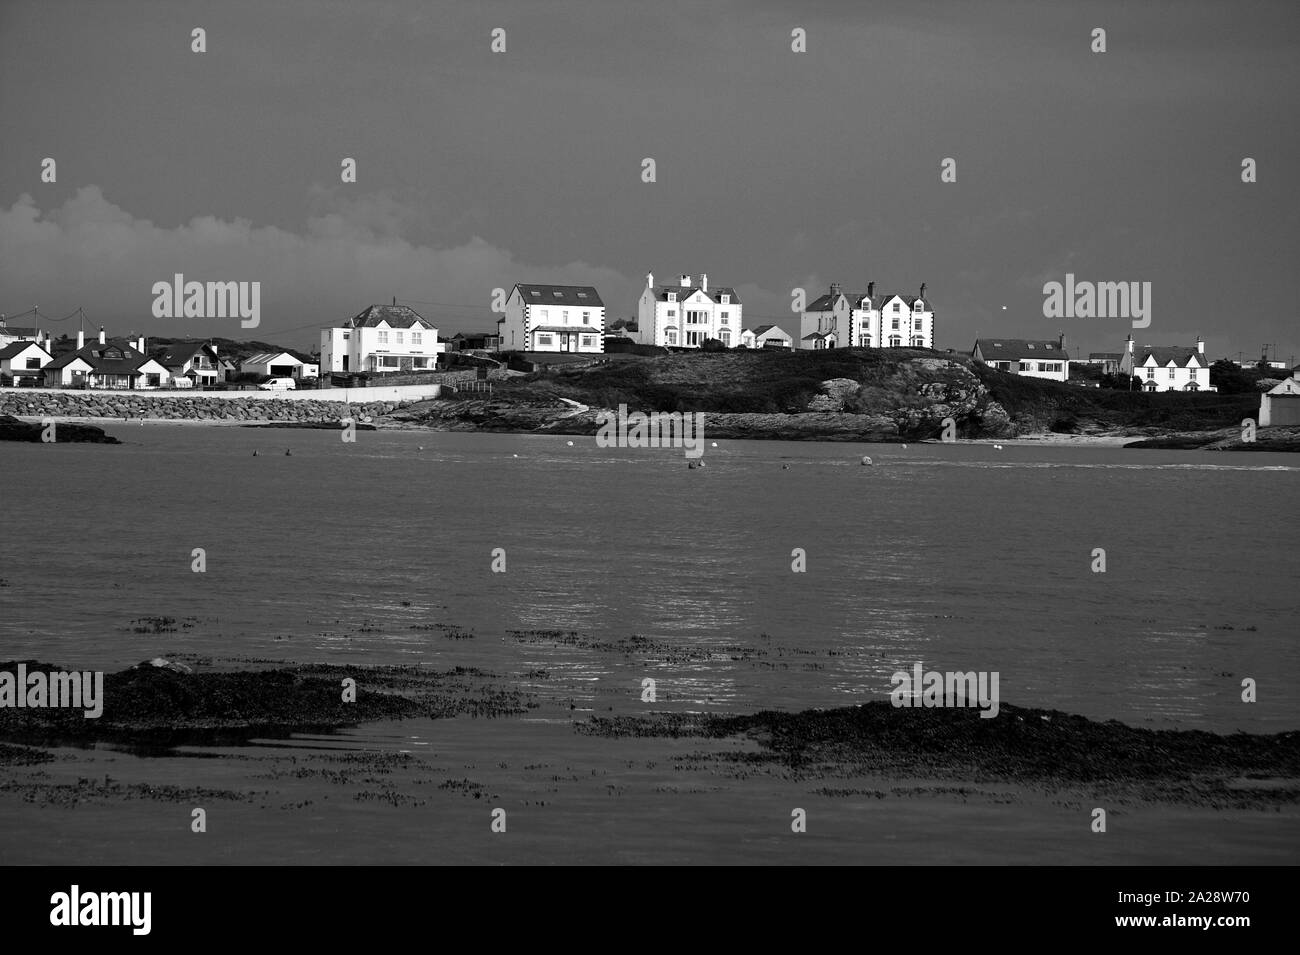 Houses across the water, Trearddur Bay, Anglesey, North Wales, UK Stock Photo